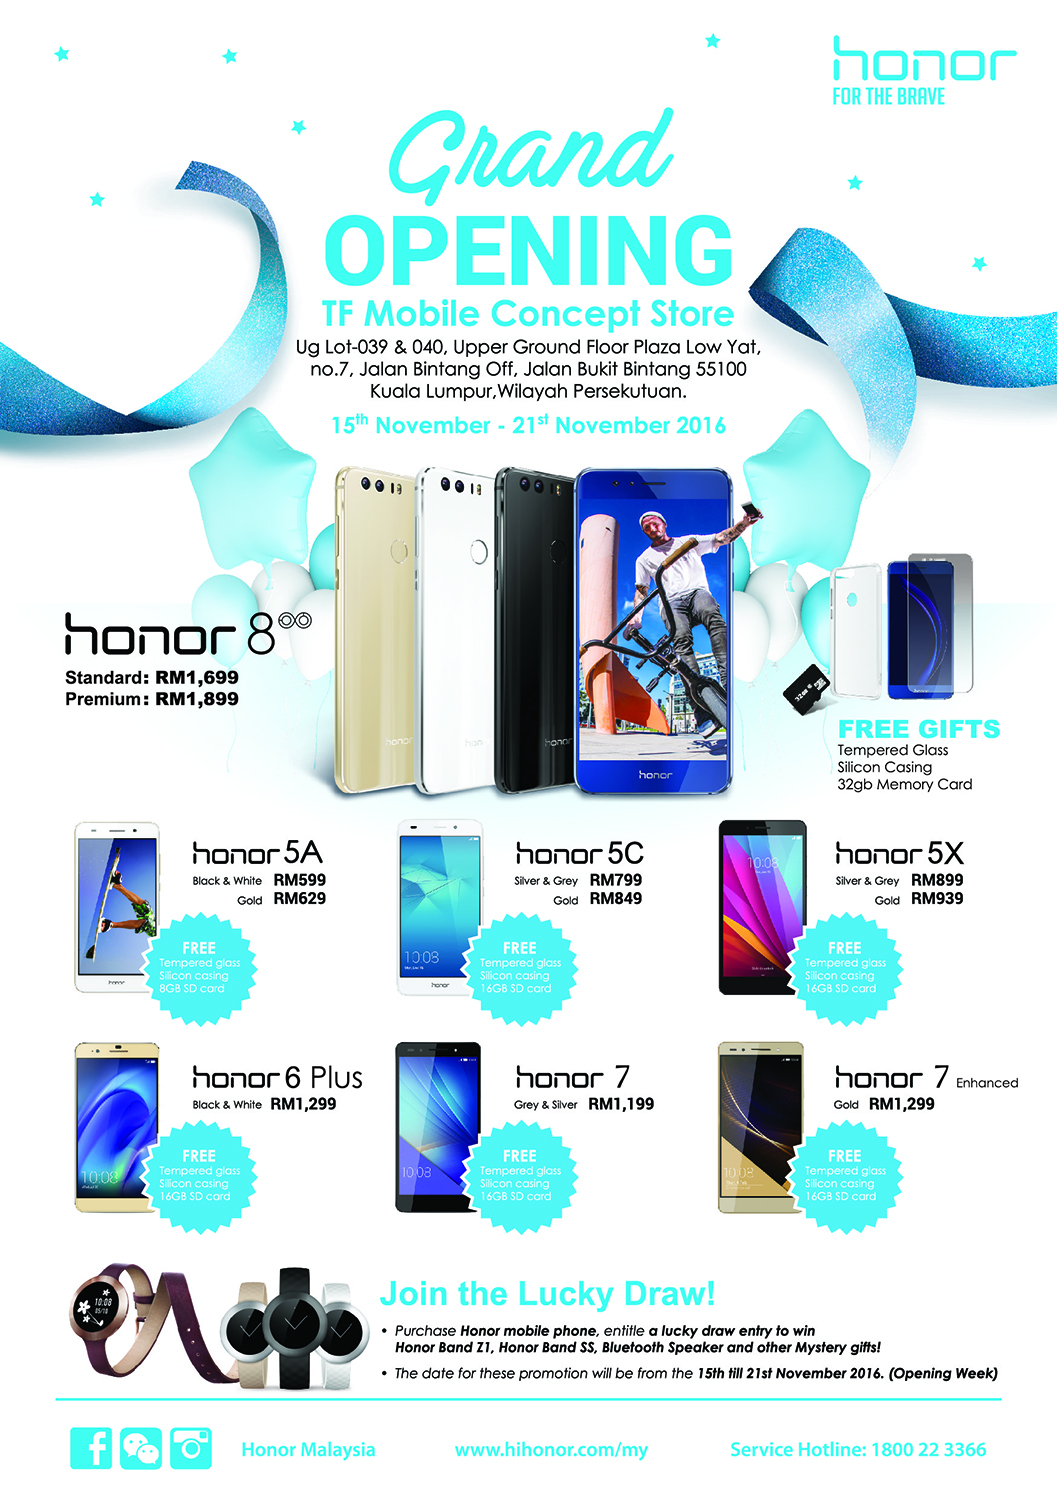 TF Mobile and Honor Malaysia Promotion